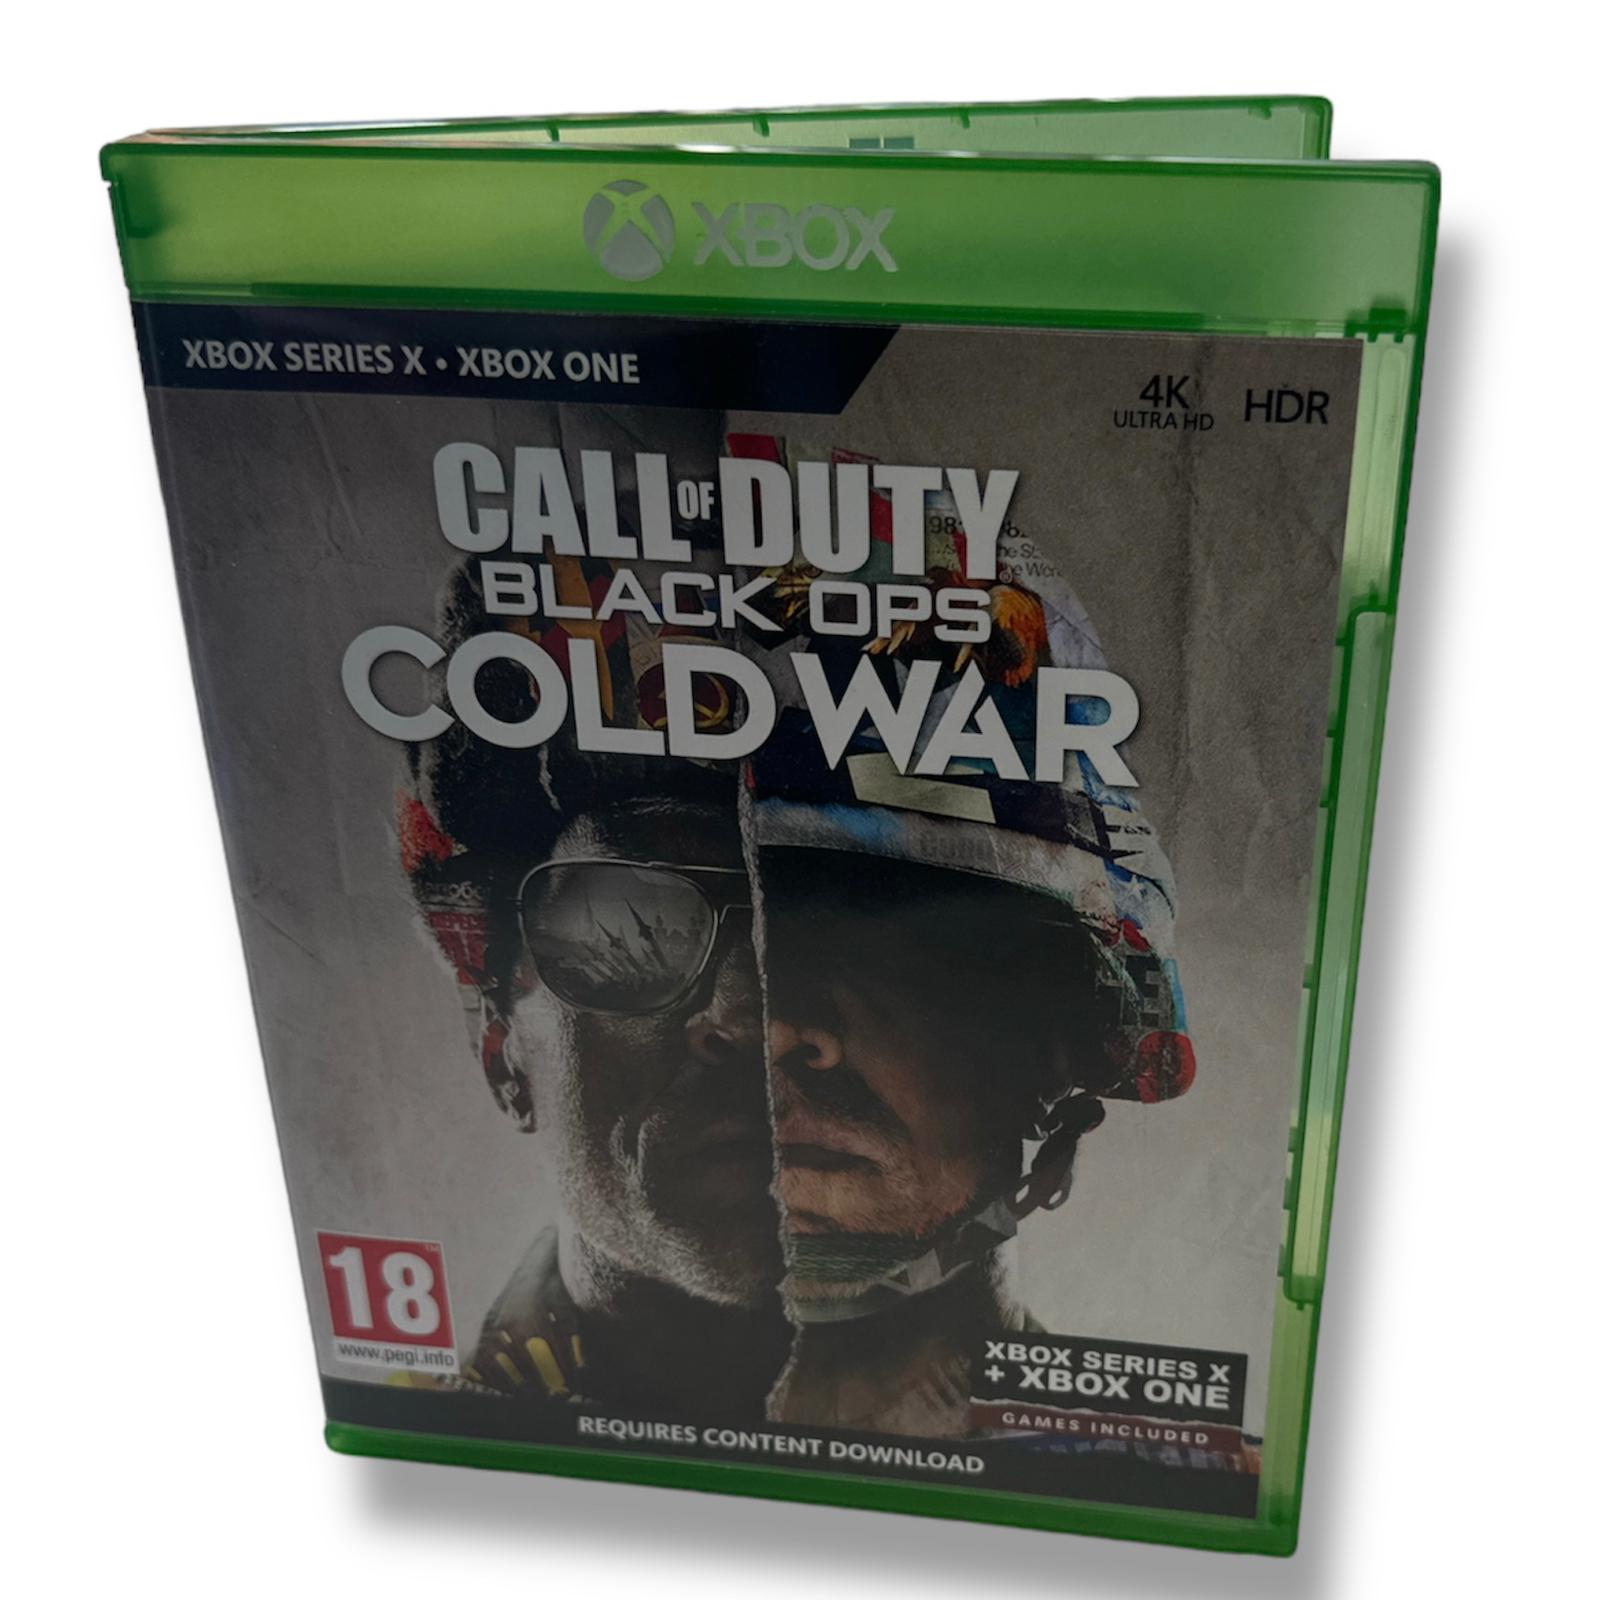 Call Of Duty Black Ops Cold War - Xbox series X / Xbox one 